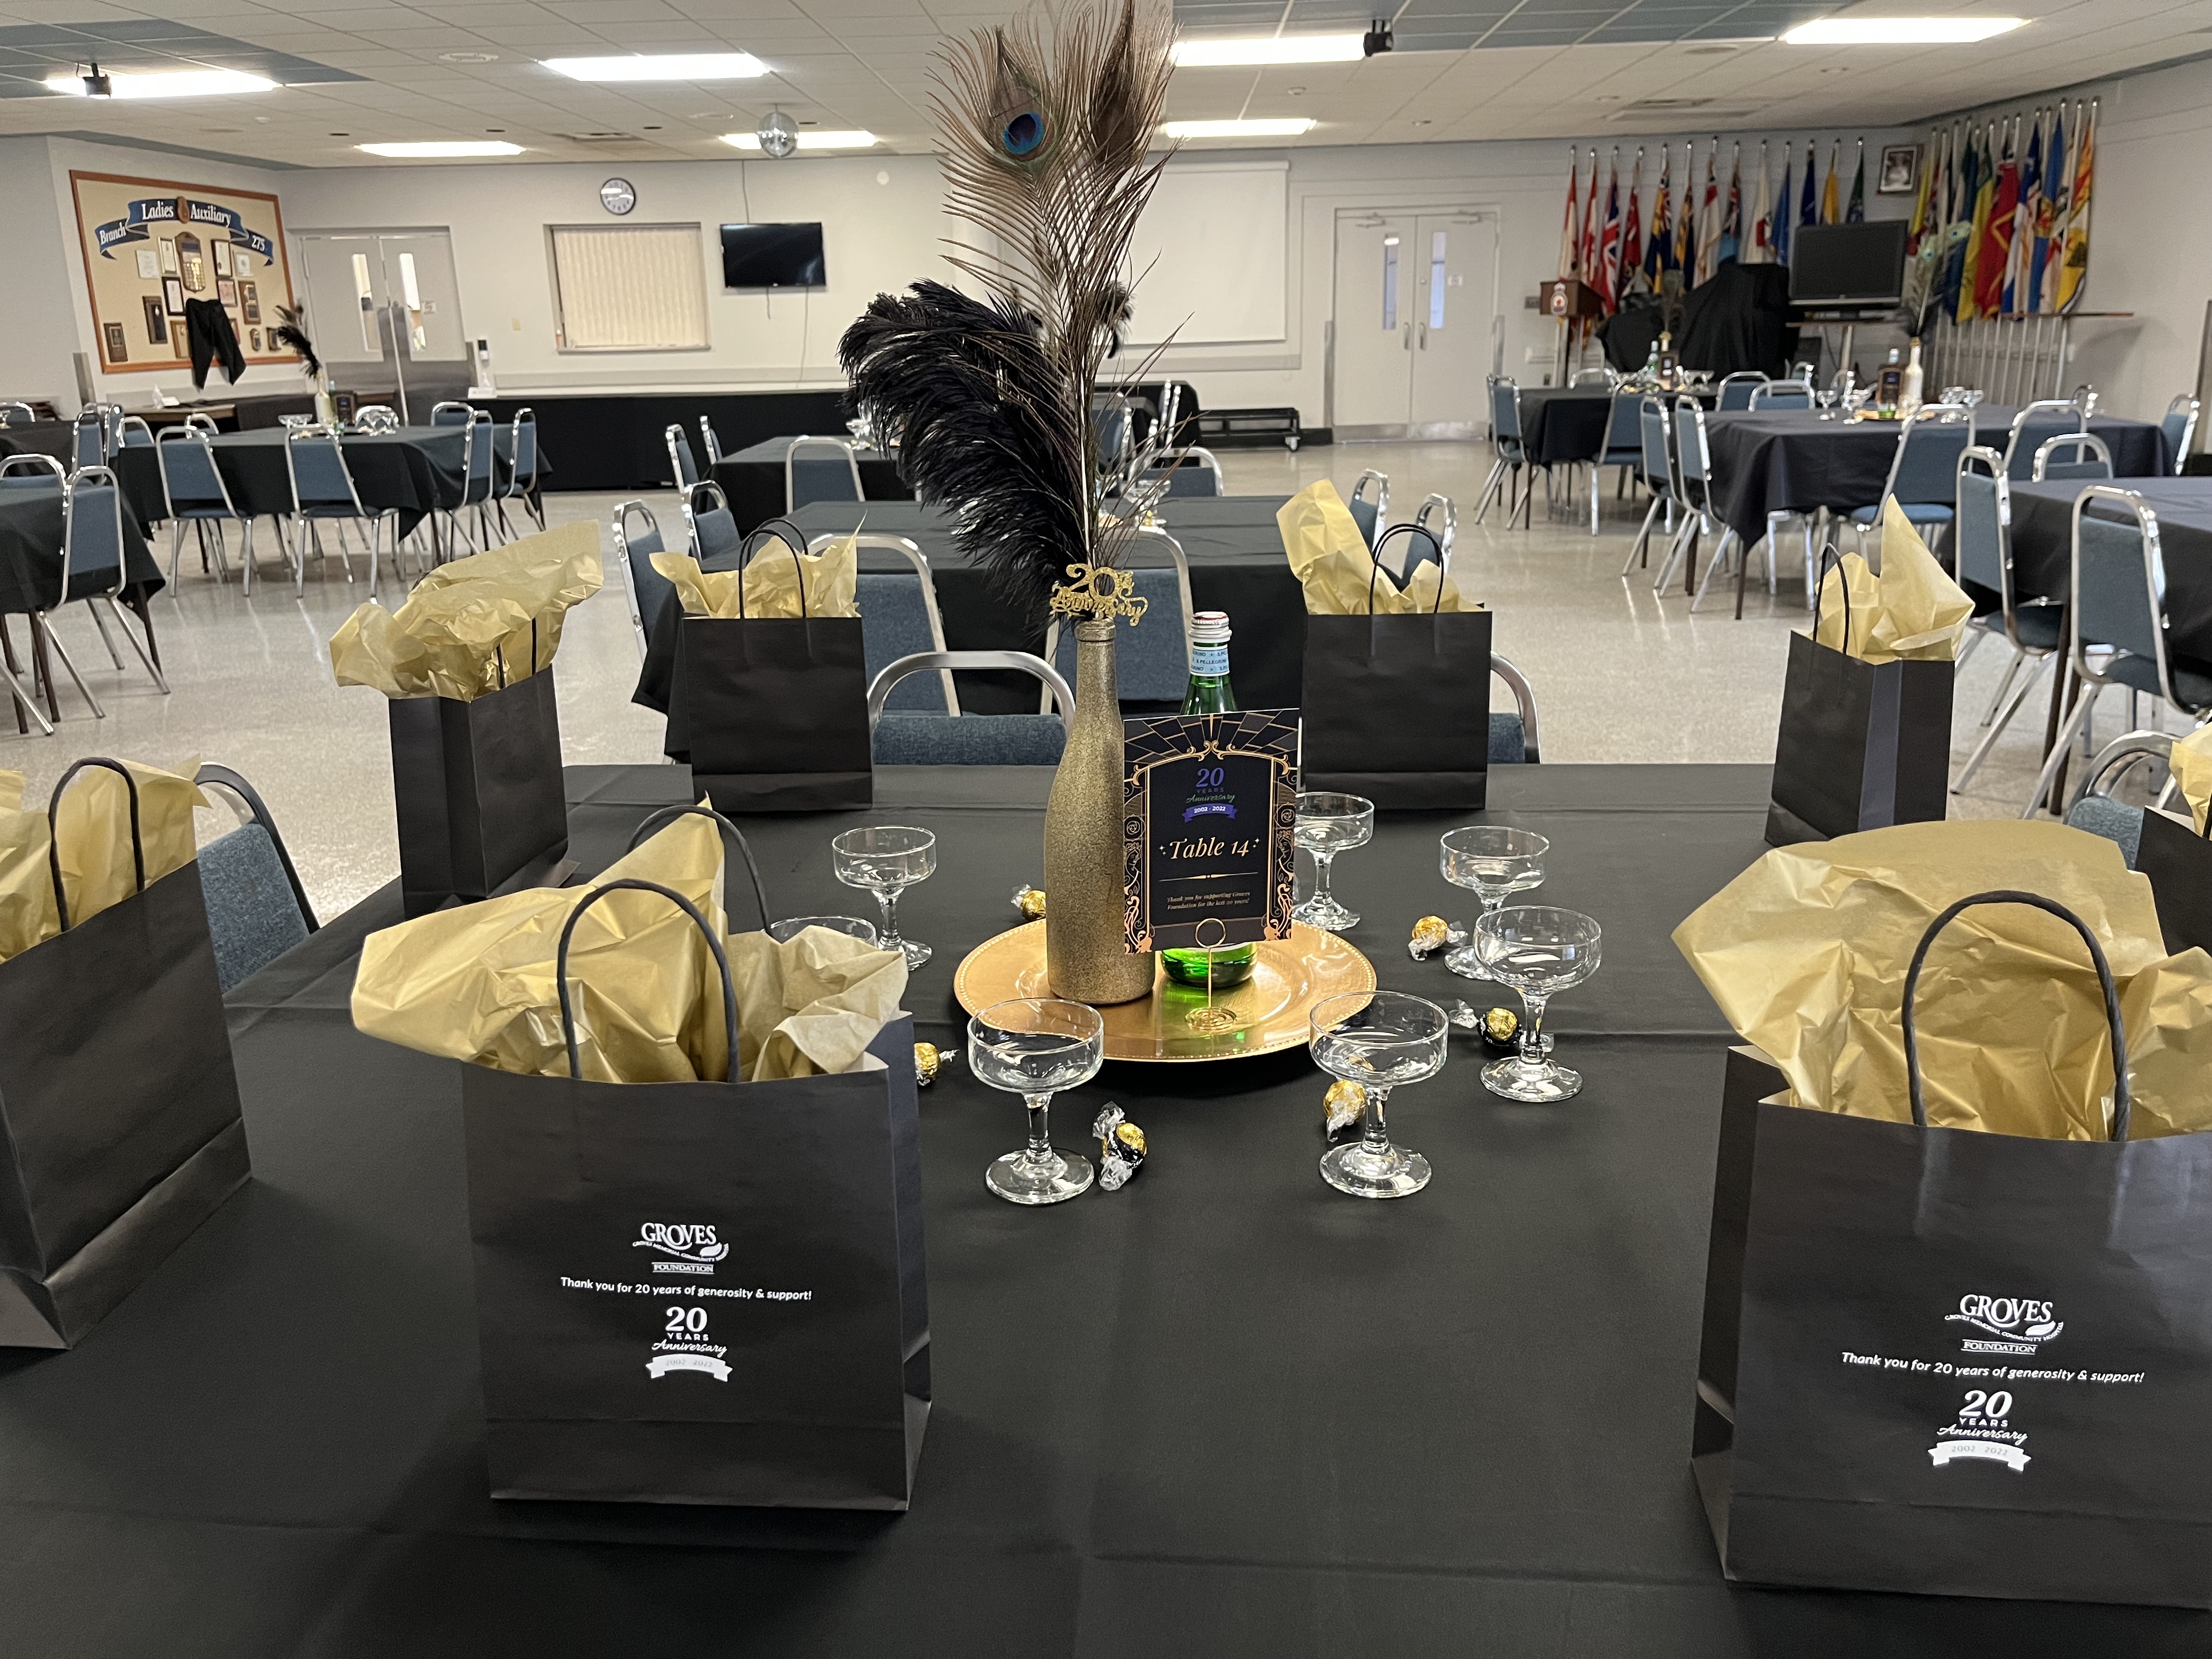 Table setting at event is pictured